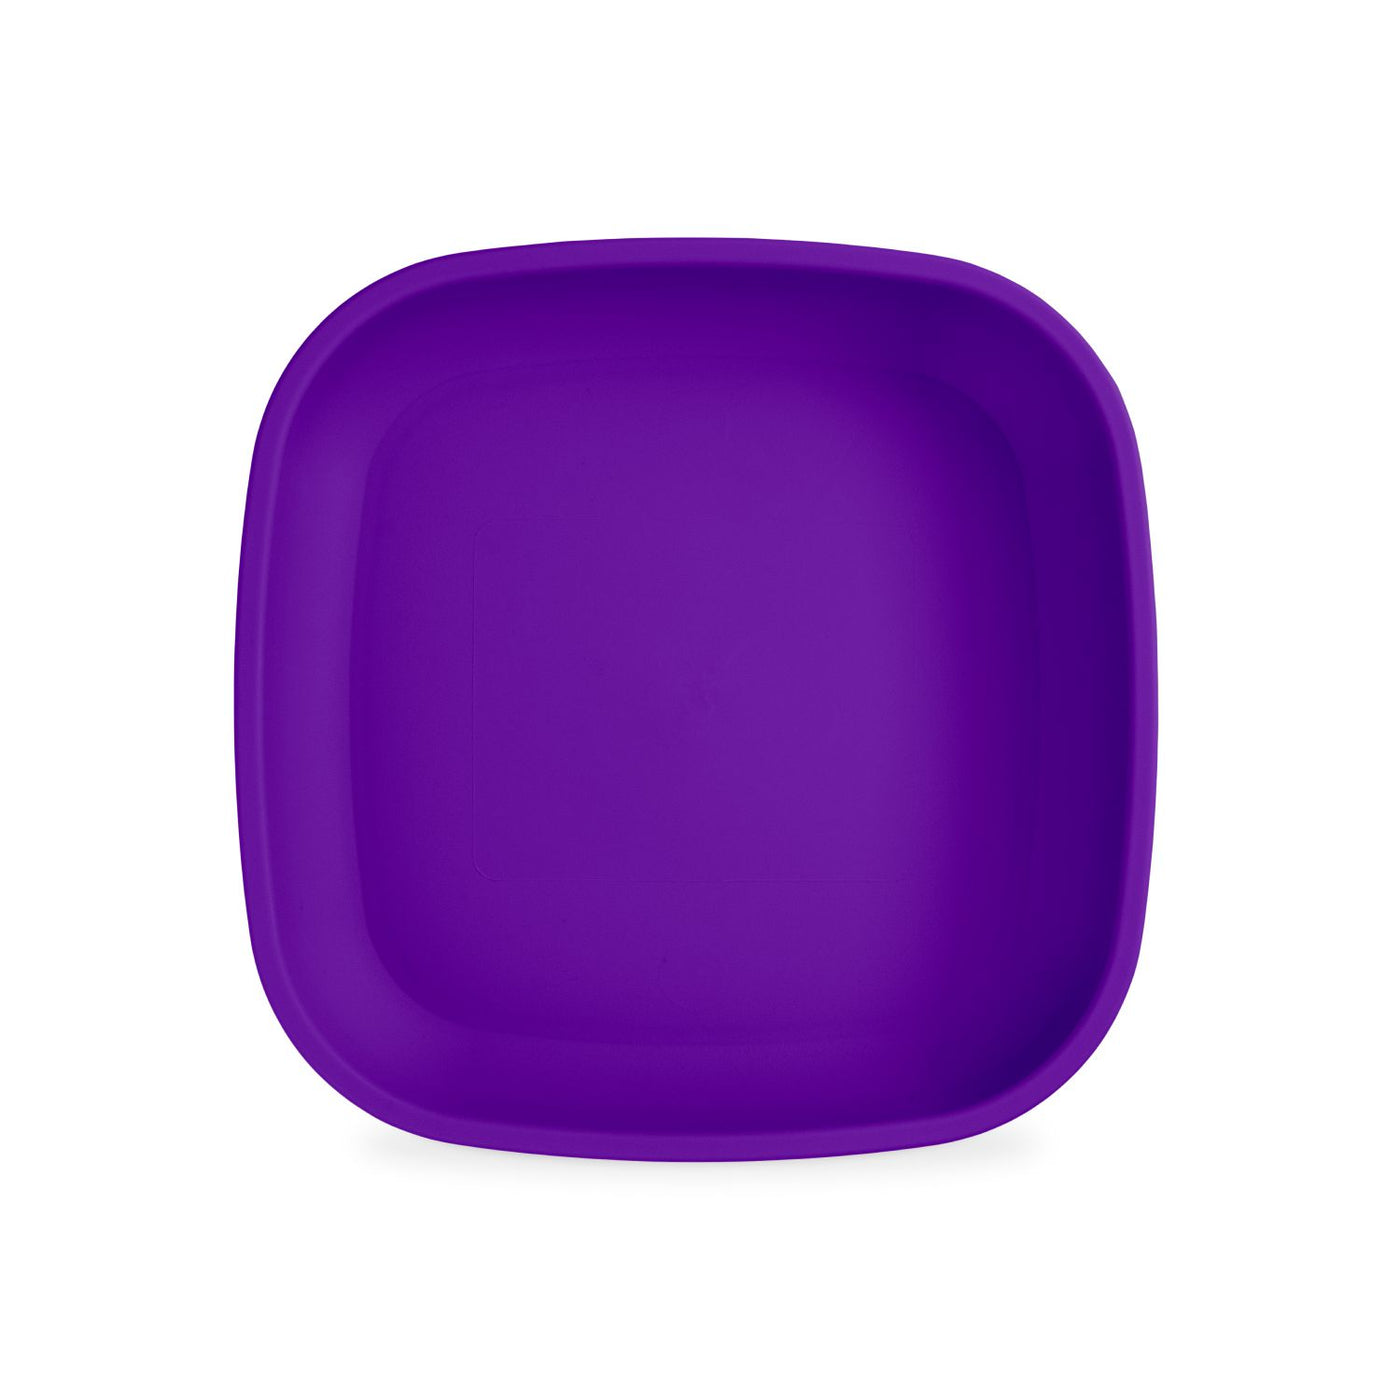 Recycled Flat Plate - Amethyst